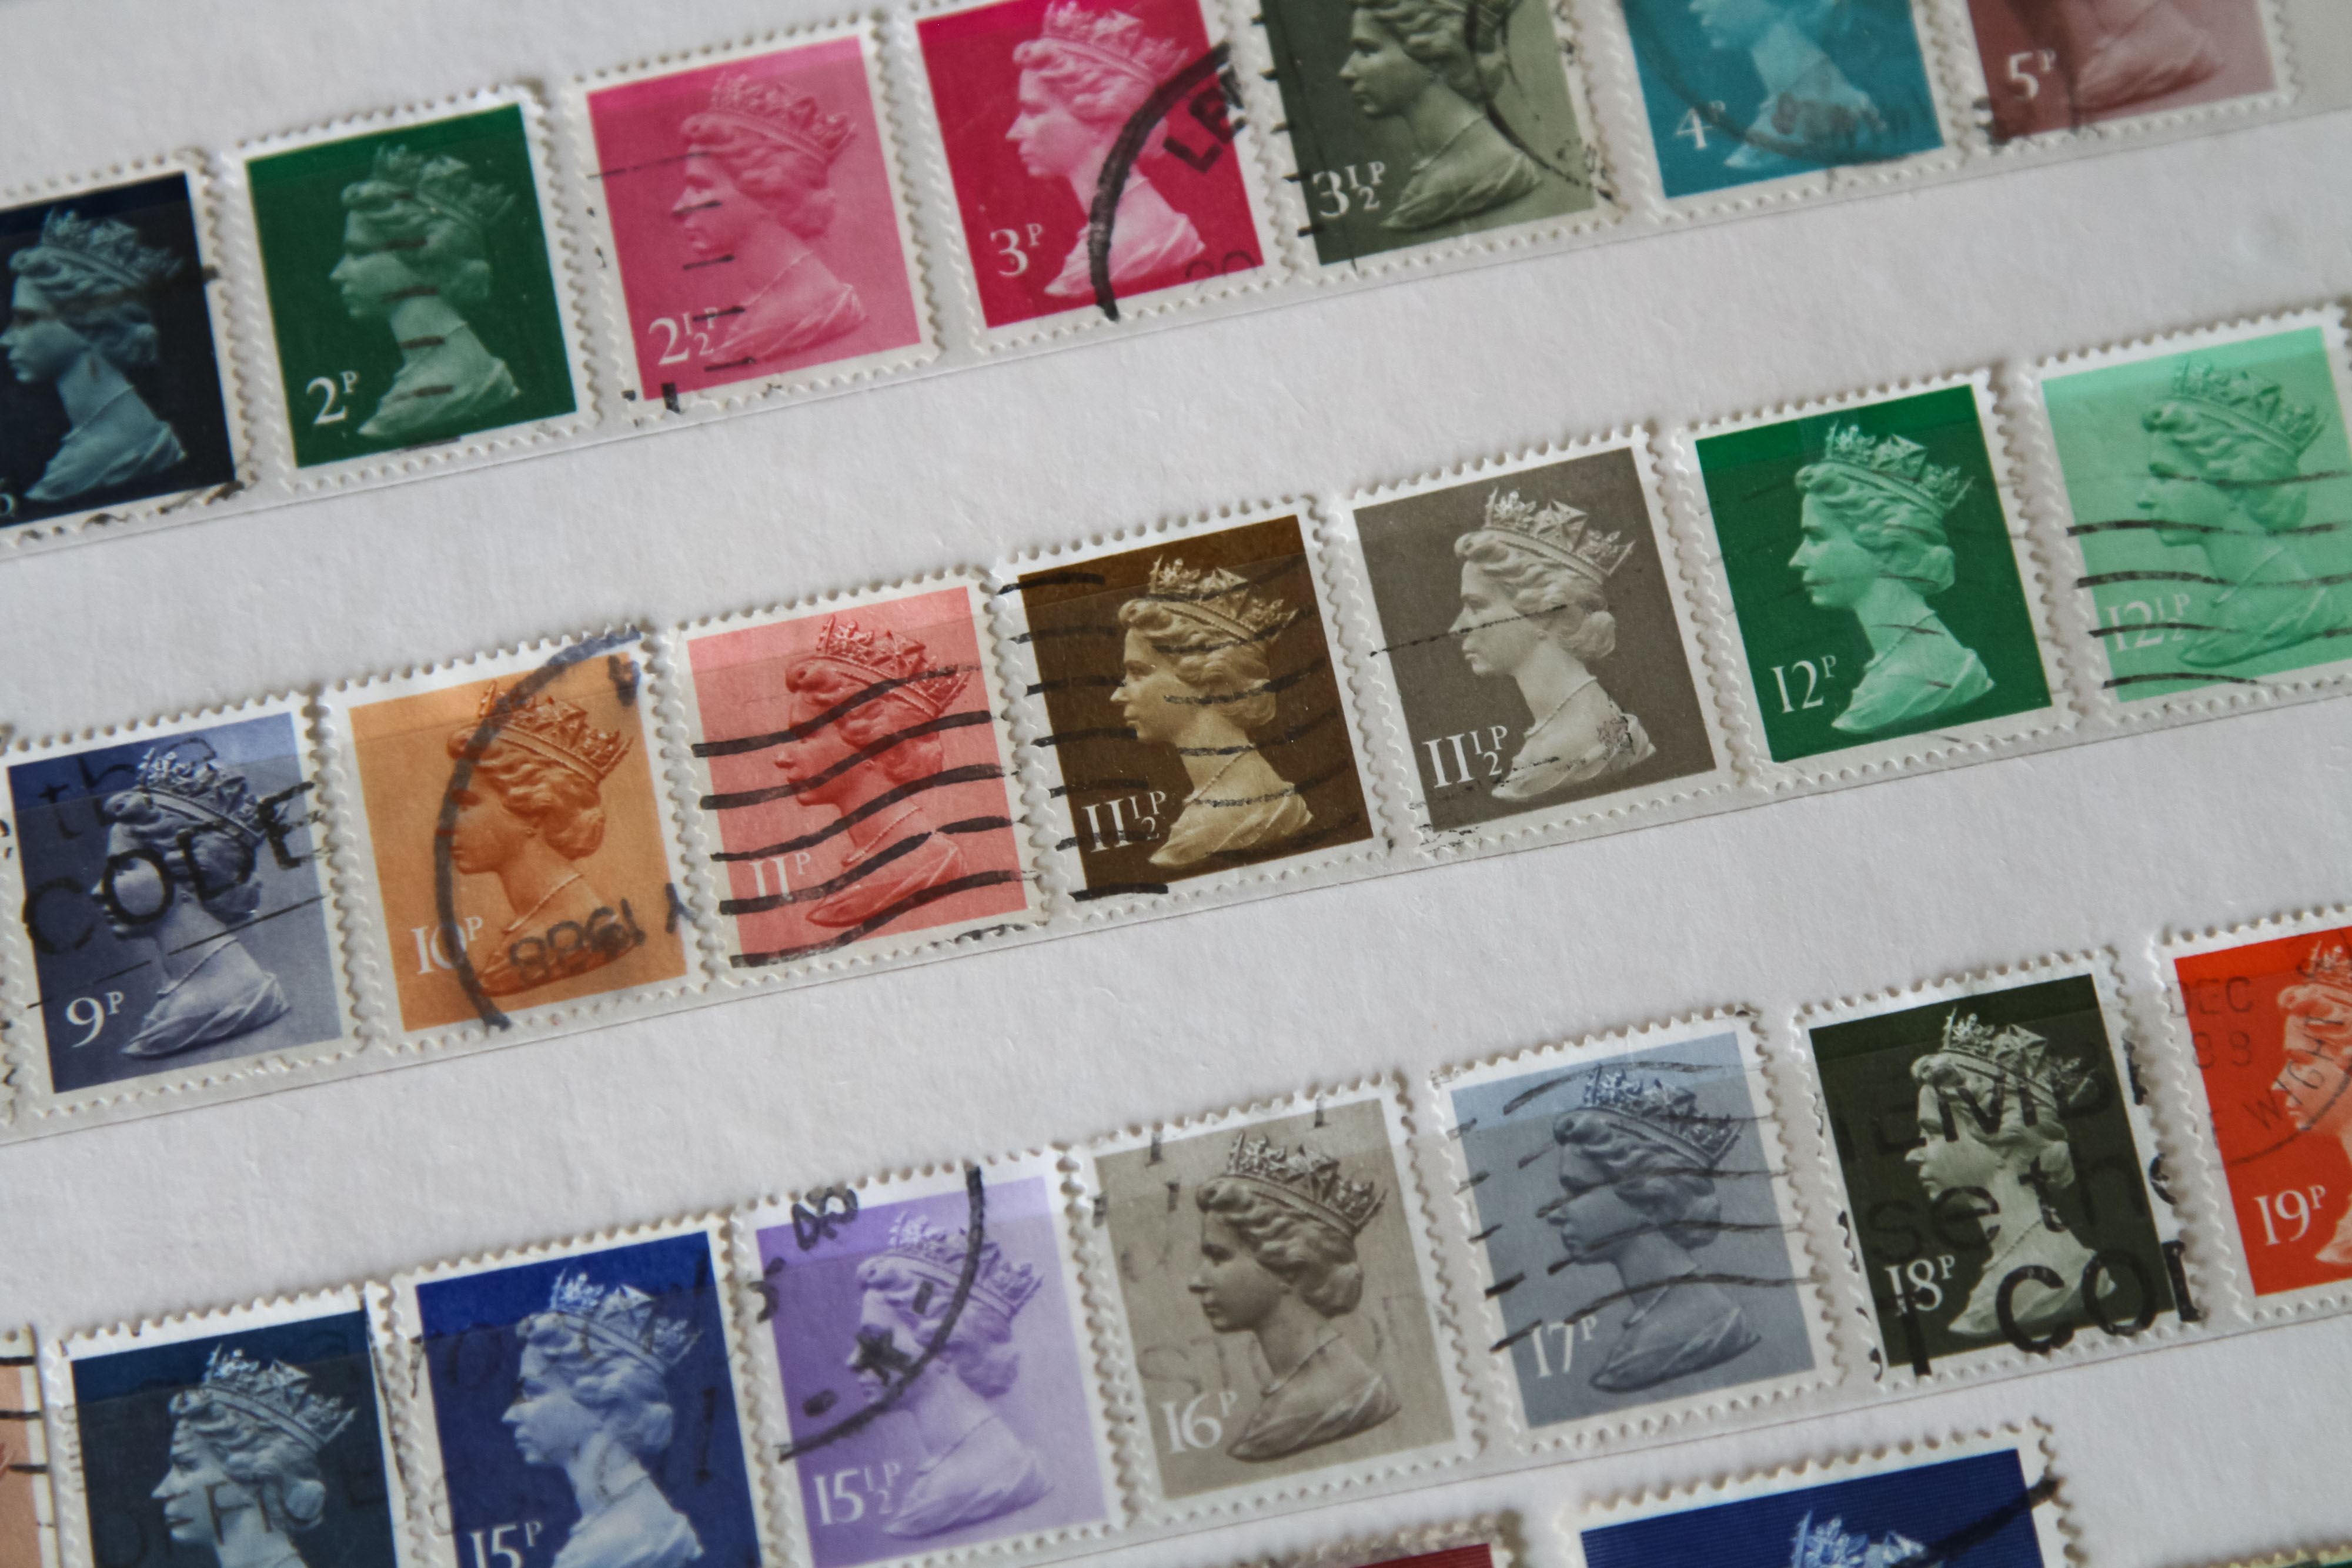 Stamps bearing the Queen's image